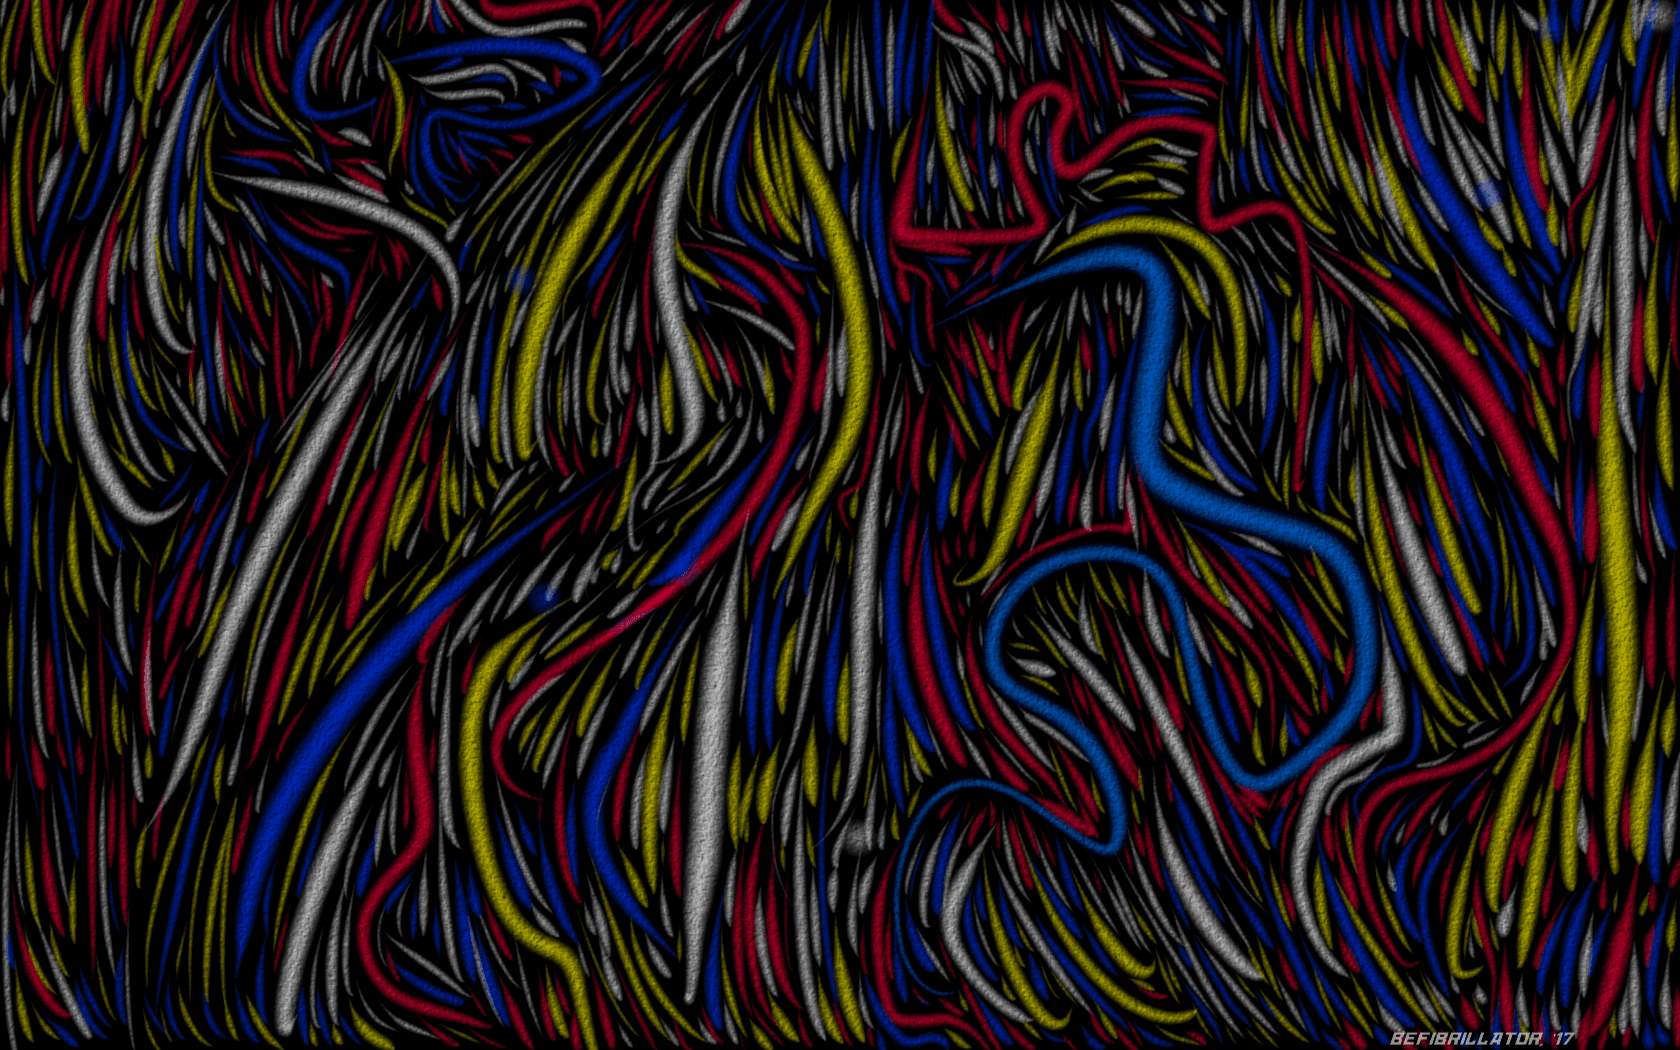 Follow The Crowd Abstract Art by Befibrillator